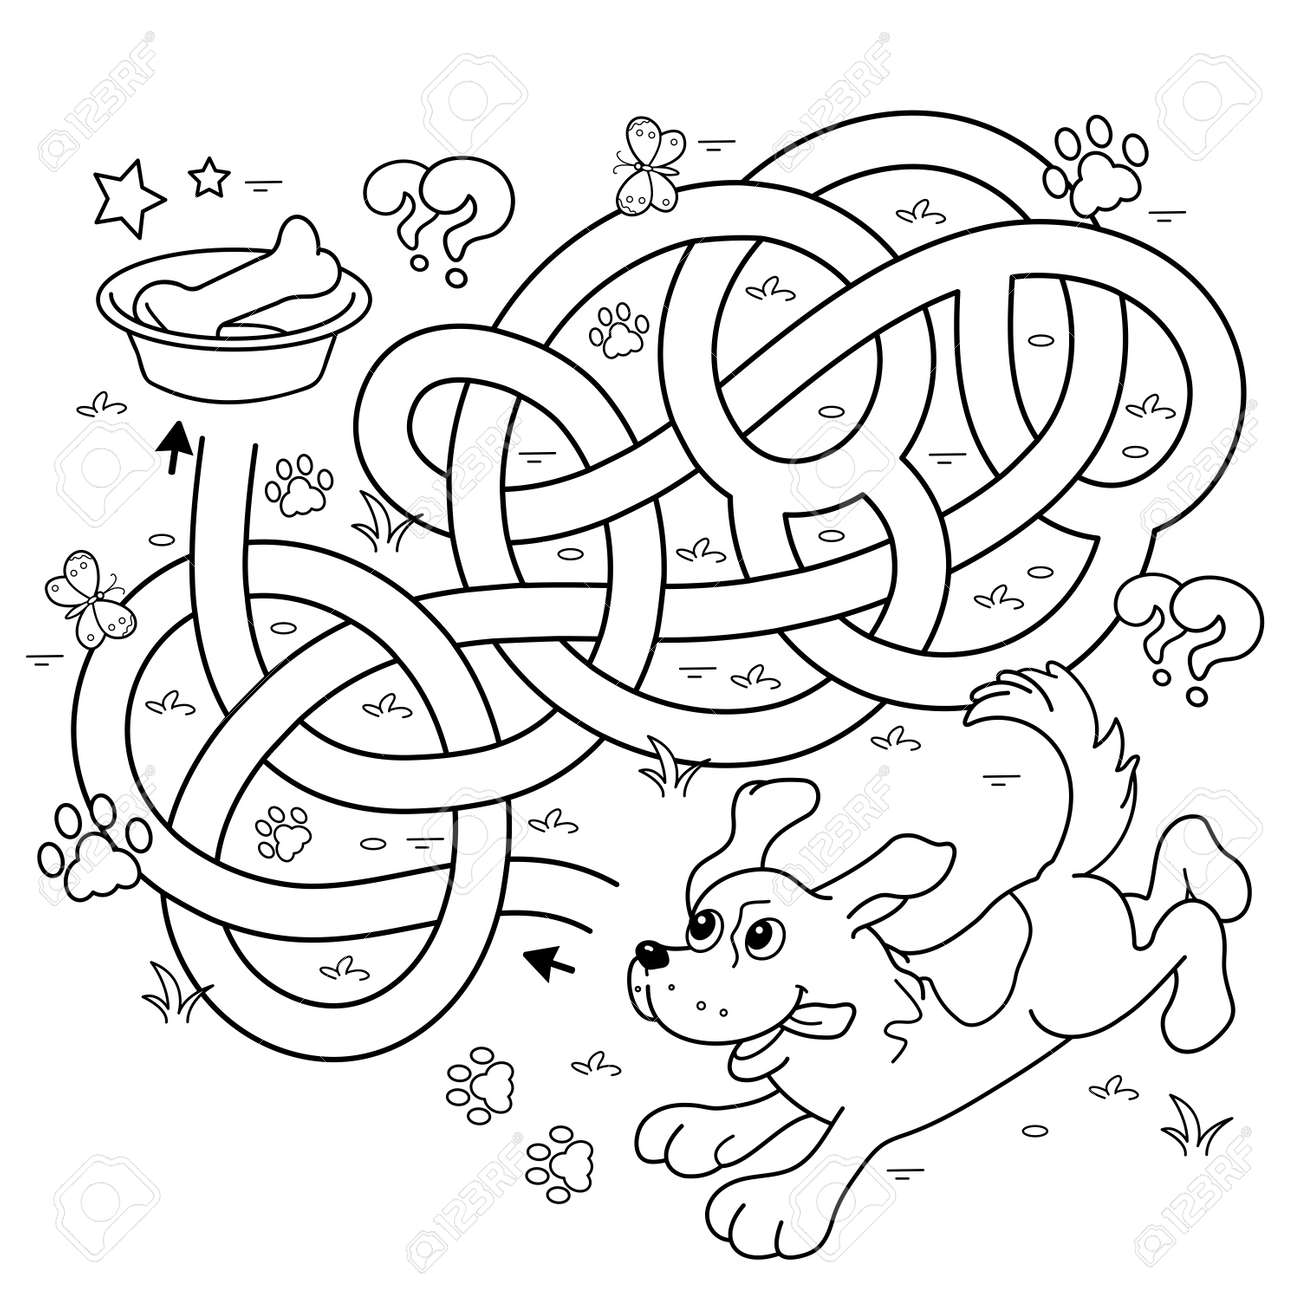 Maze or labyrinth game puzzle tangled road coloring page outline of cartoon little dog with bone puppy coloring book for kids royalty free svg cliparts vectors and stock illustration image